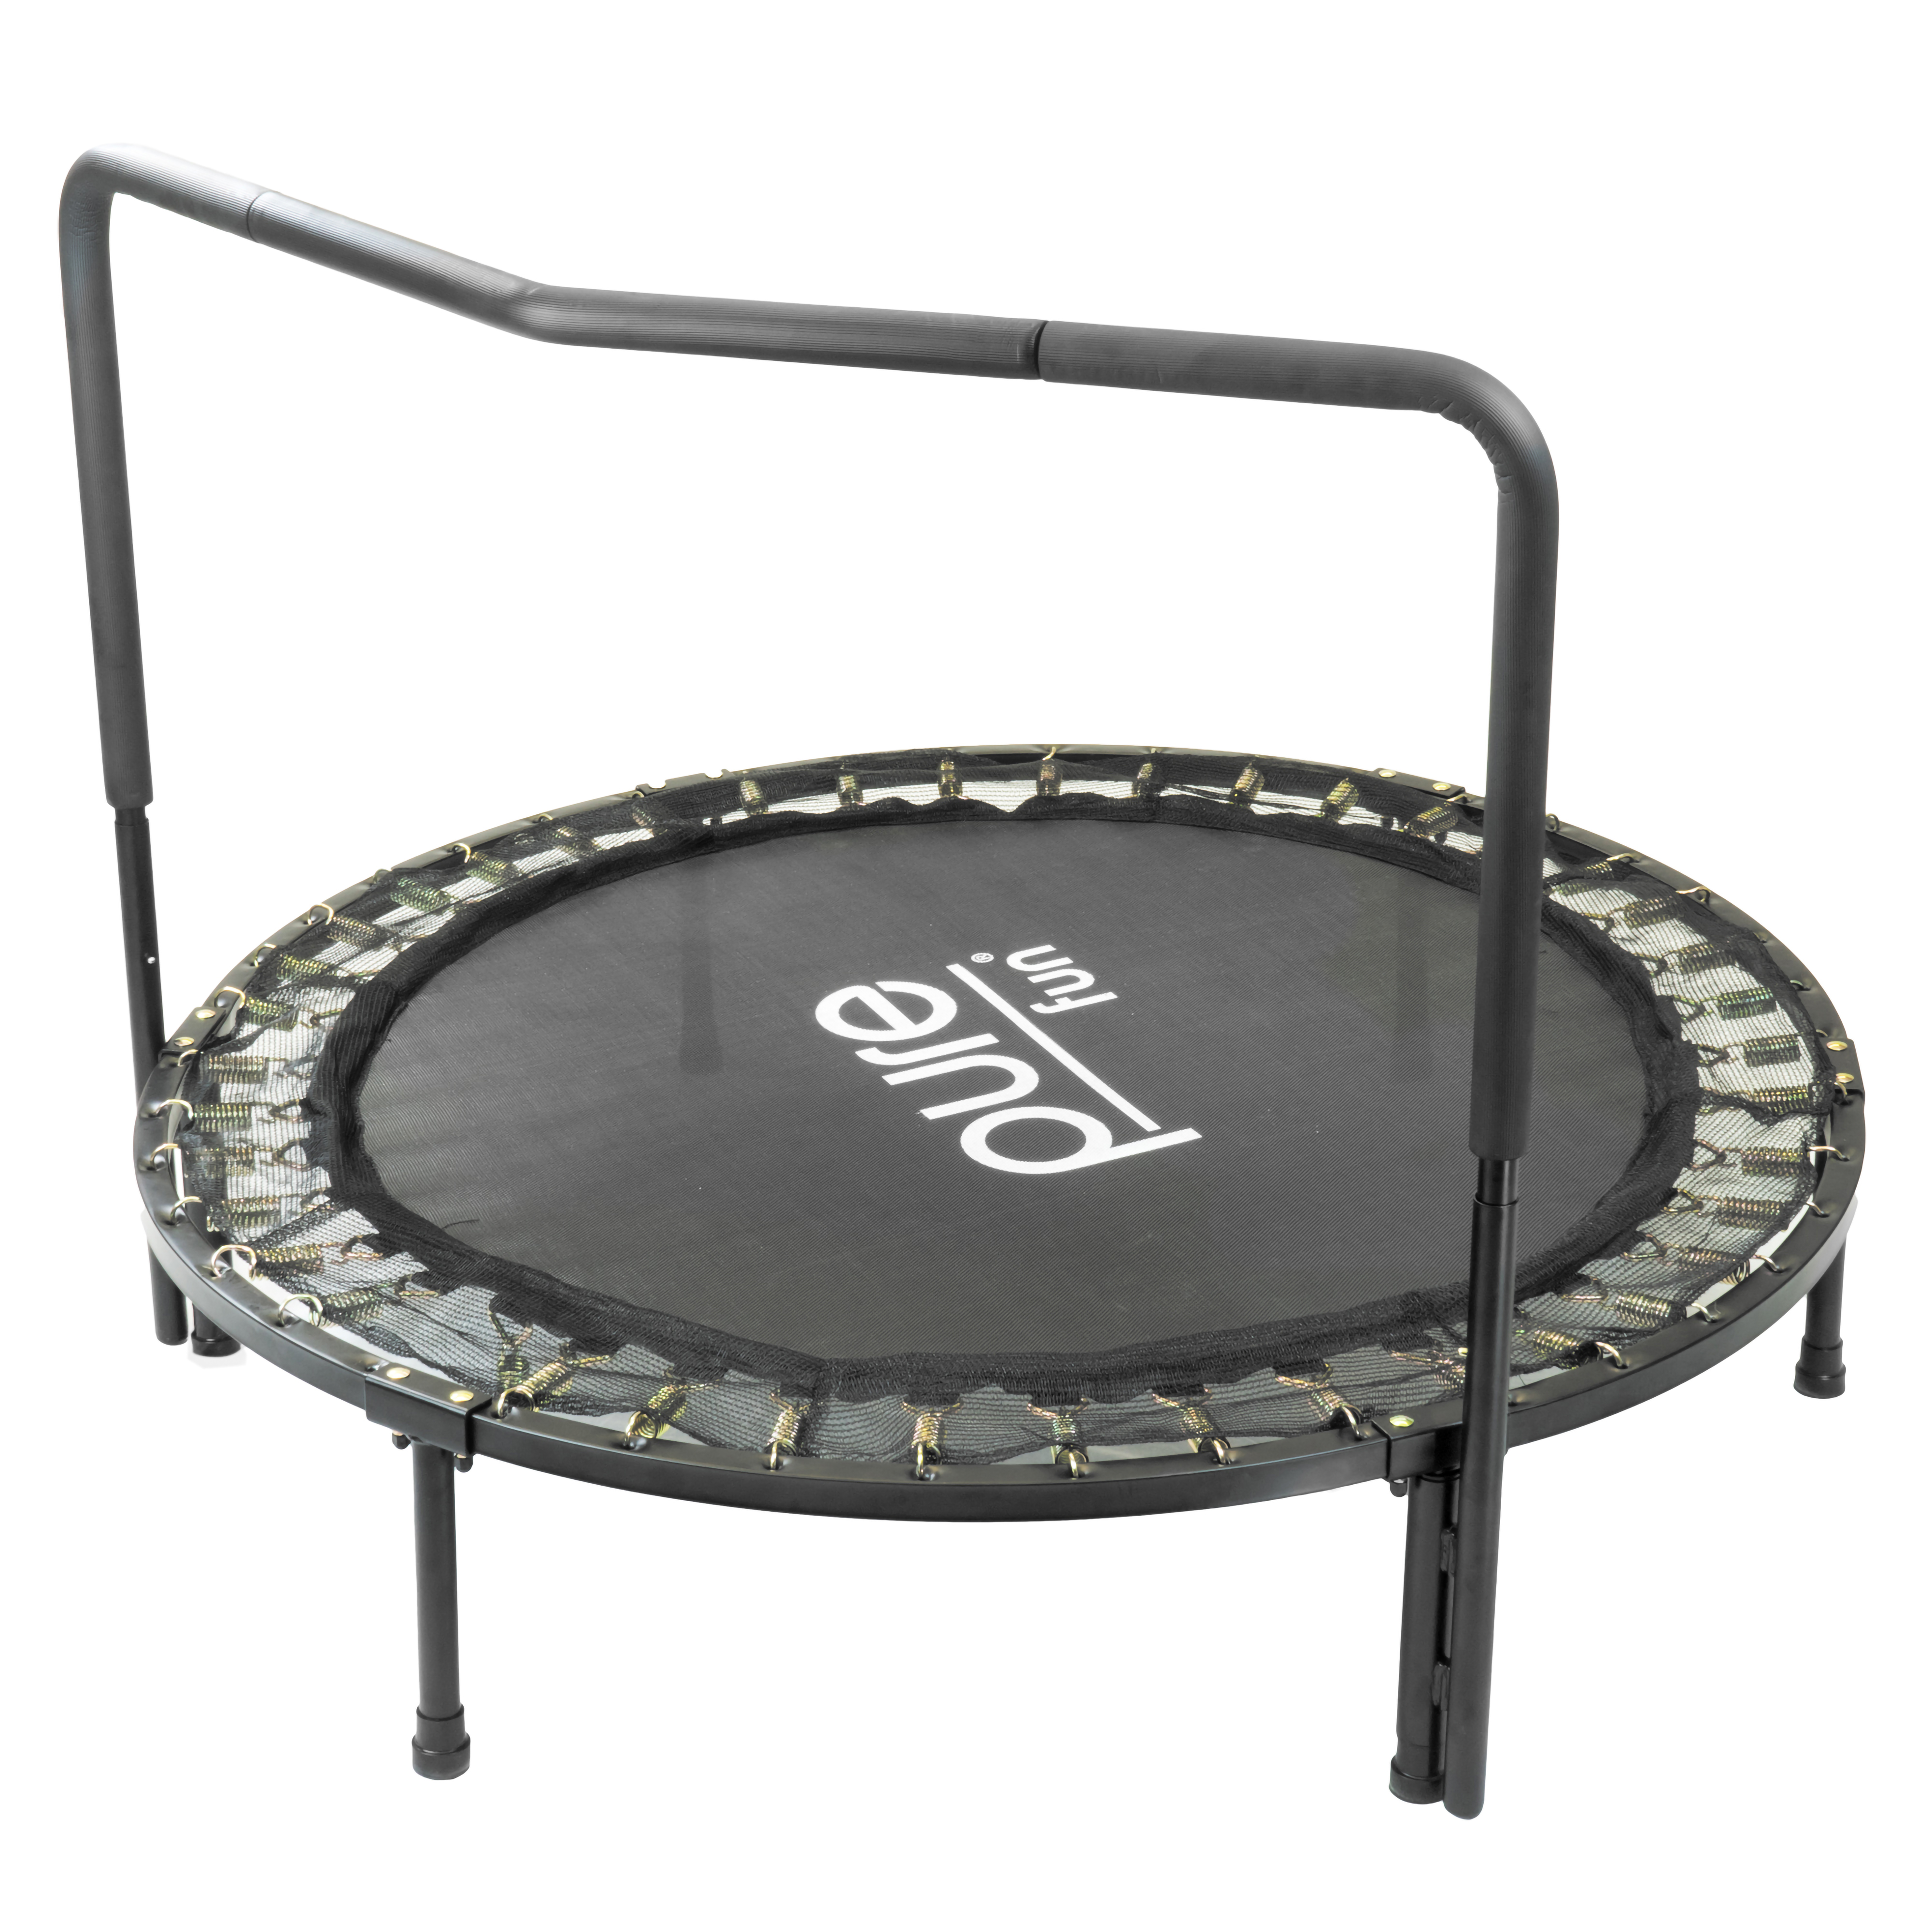 Pure Fun Super Jumper Kids 48-Inch Trampoline with Handrail, Paint - image 4 of 5